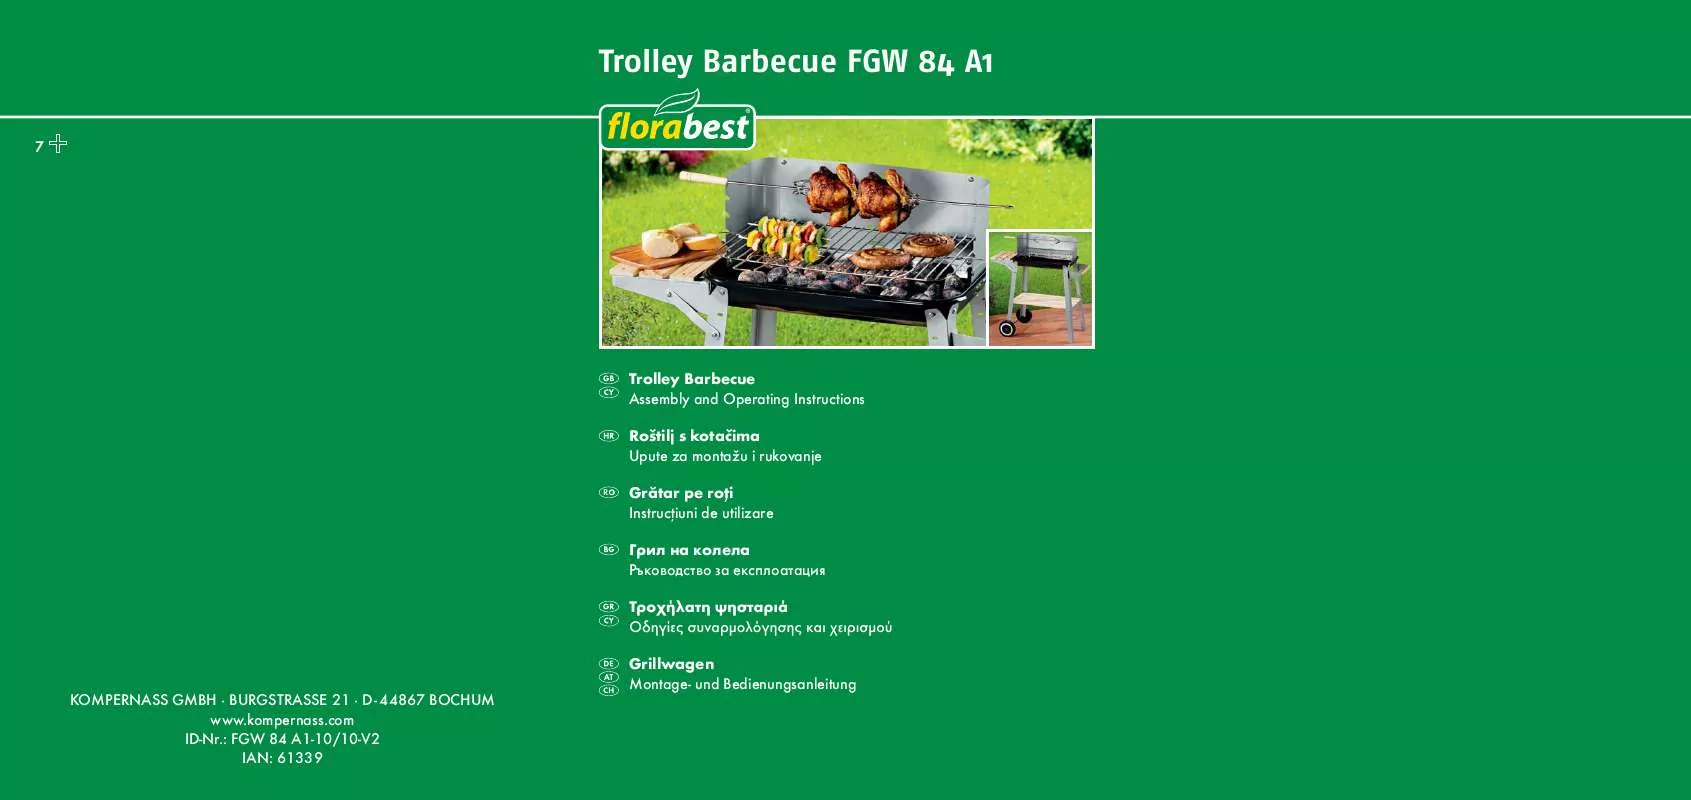 Mode d'emploi FLORABEST FGW 84 A1 TROLLEY BARBECUE